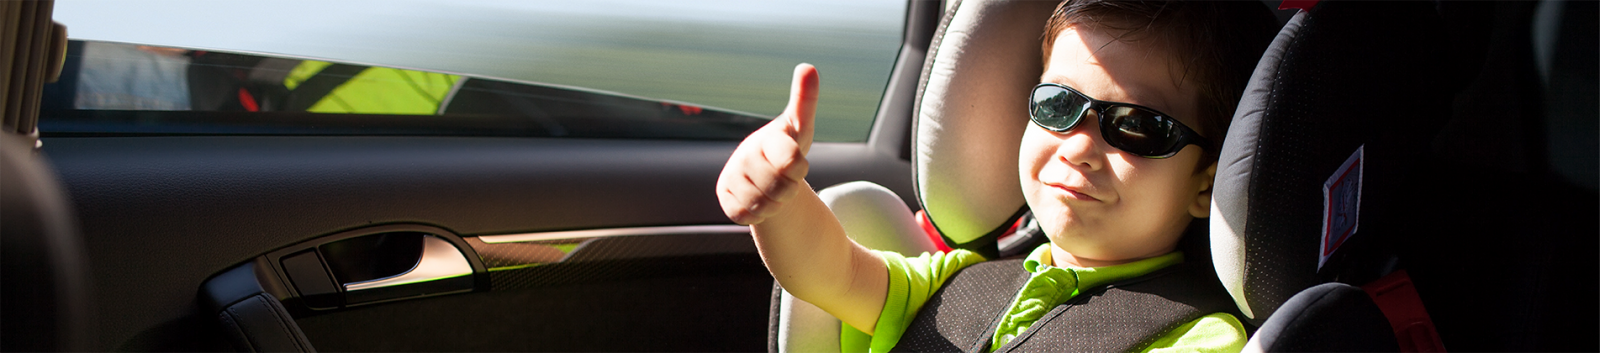 Child in carseat wearing sunglasses and giving a thumbs up banner image